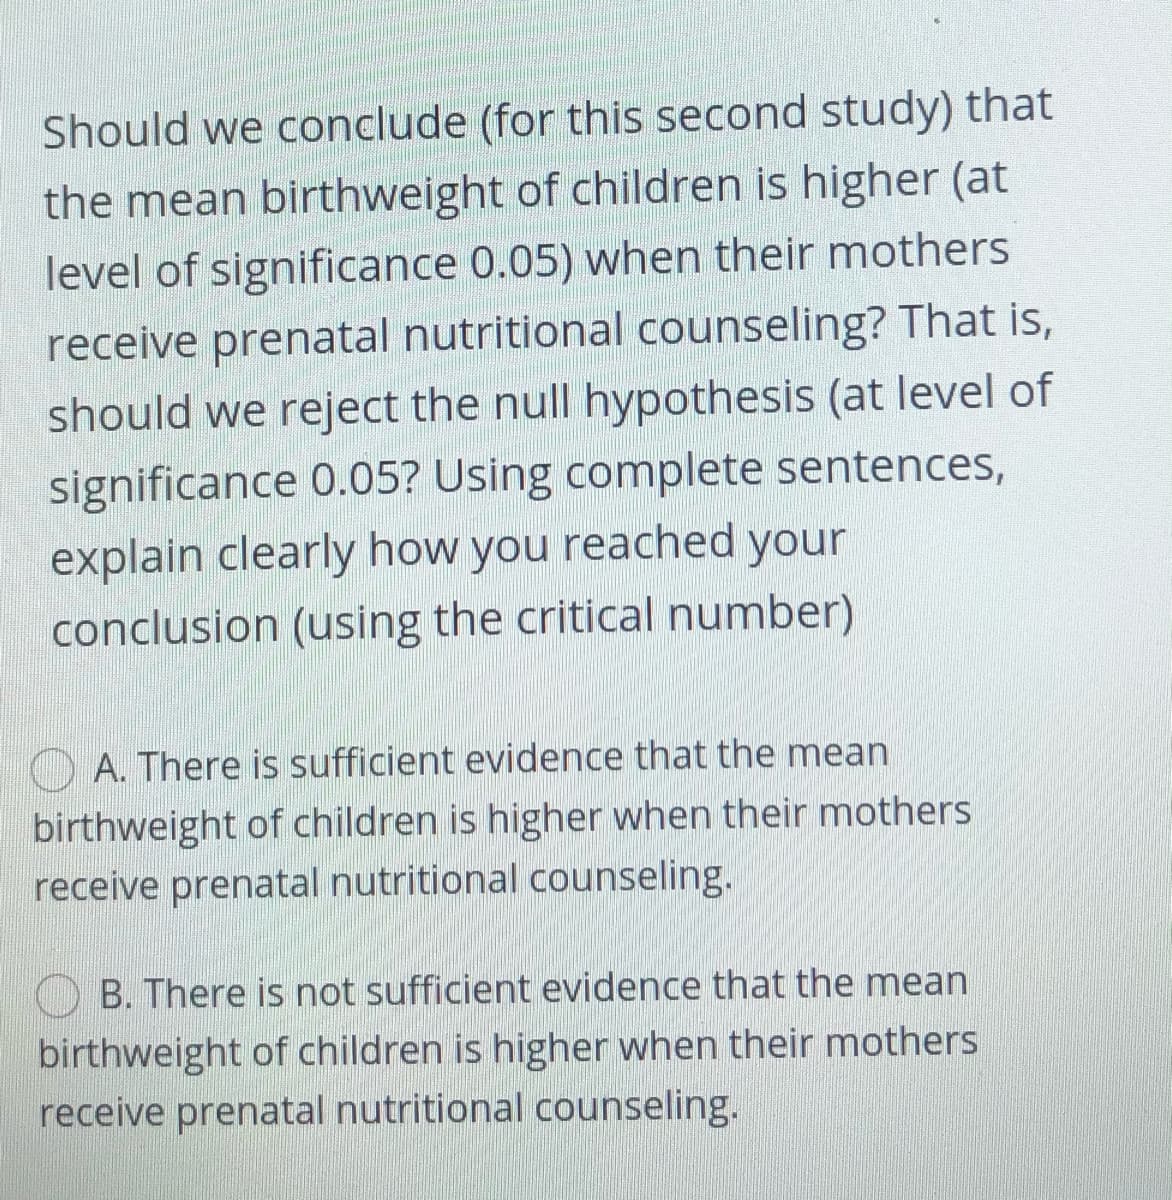 Should we conclude (for this second study) that
the mean birthweight of children is higher (at
level of significance 0.05) when their mothers
receive prenatal nutritional counseling? That is,
should we reject the null hypothesis (at level of
significance 0.05? Using complete sentences,
explain clearly how you reached your
conclusion (using the critical number)
O A. There is sufficient evidence that the mean
birthweight of children is higher when their mothers
receive prenatal nutritional counseling.
B. There is not sufficient evidence that the mean
birthweight of children is higher when their mothers
receive prenatal nutritional counseling.
